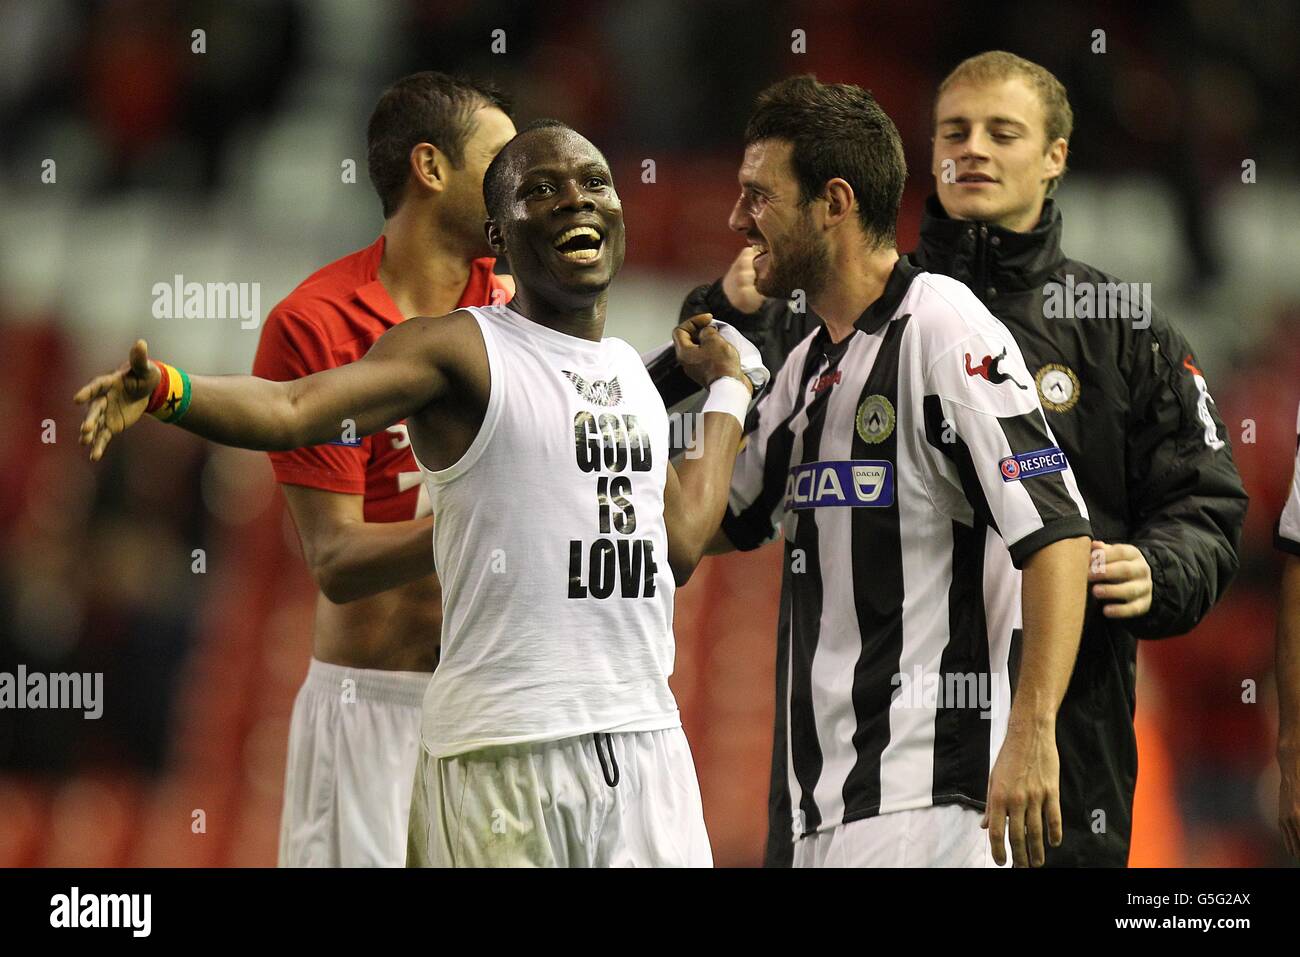 Udinese's Andrea Lazzari and Emmanuel Agyemang-Badu (left) celebrate victory after the final whistle Stock Photo